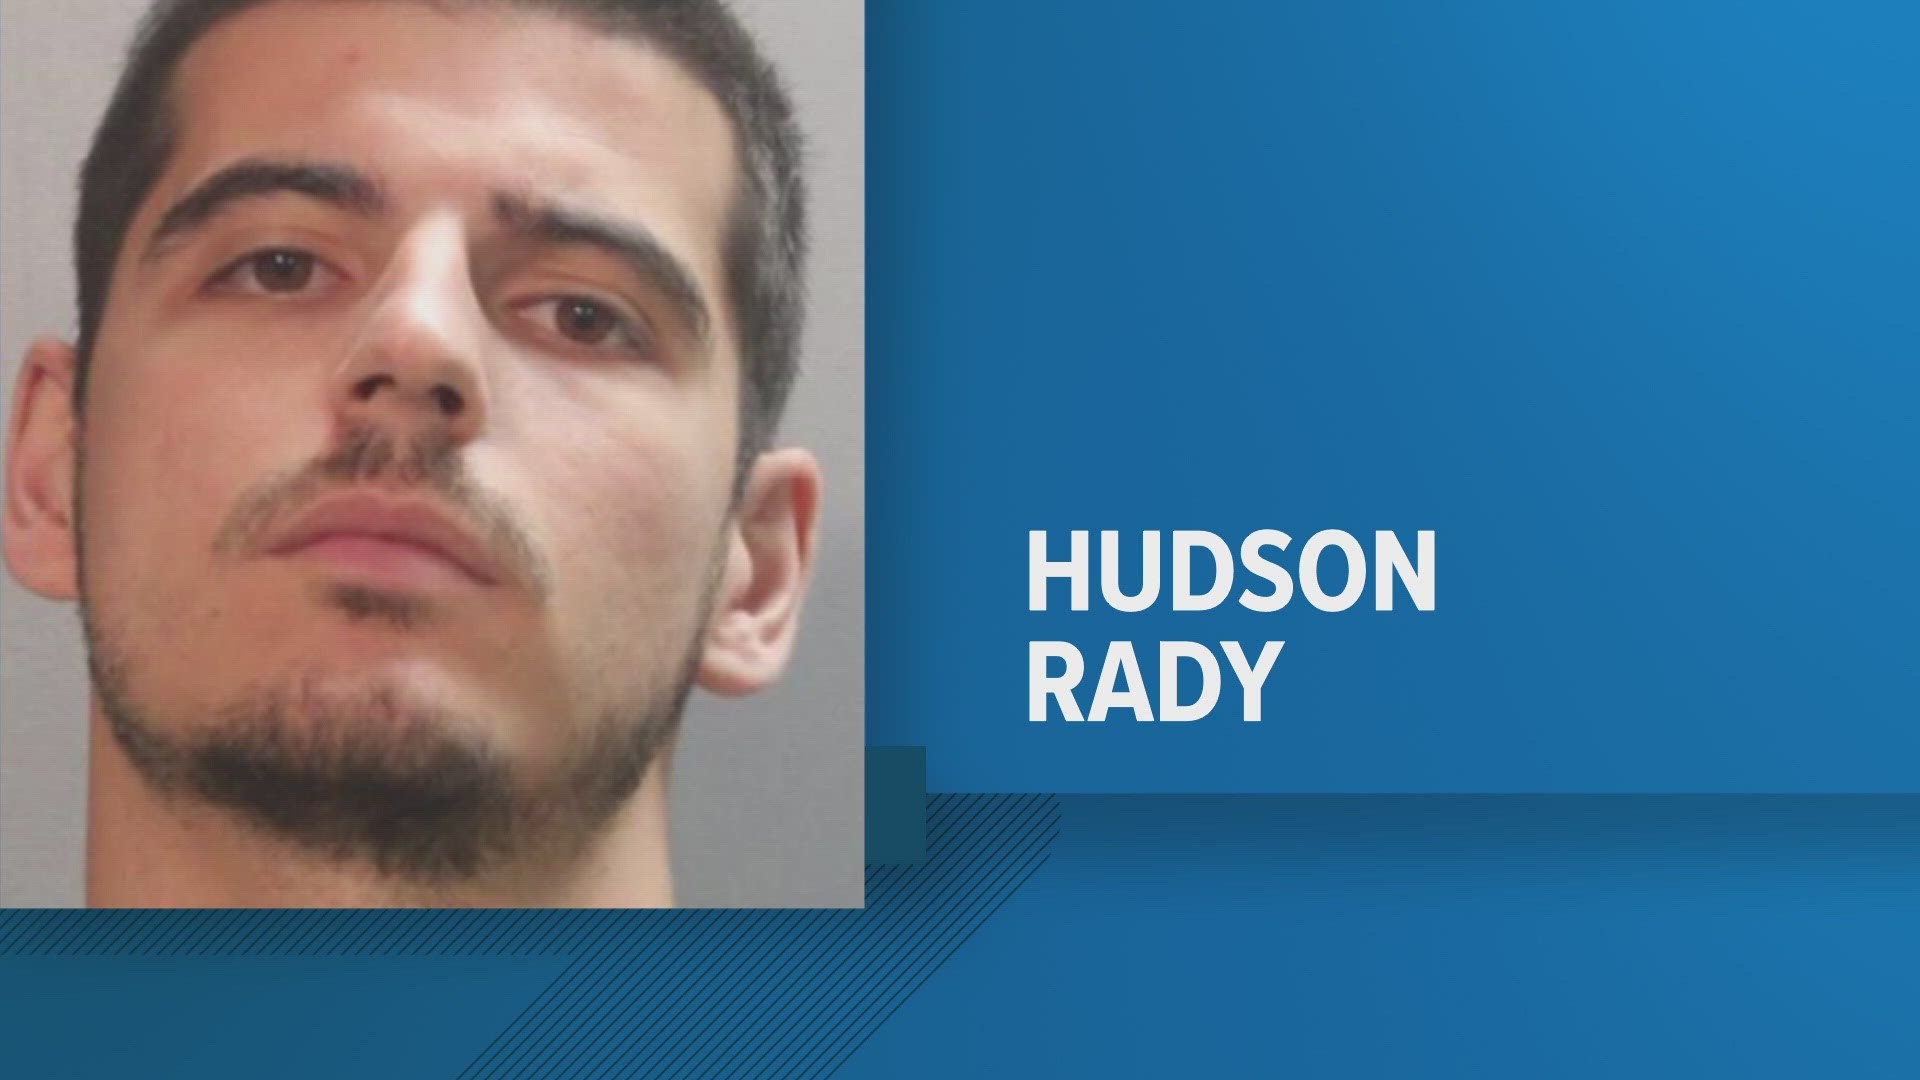 Hudson Rady, 23, has been charged with murder in connection to the death of 43-year-old Israel Gonzales.